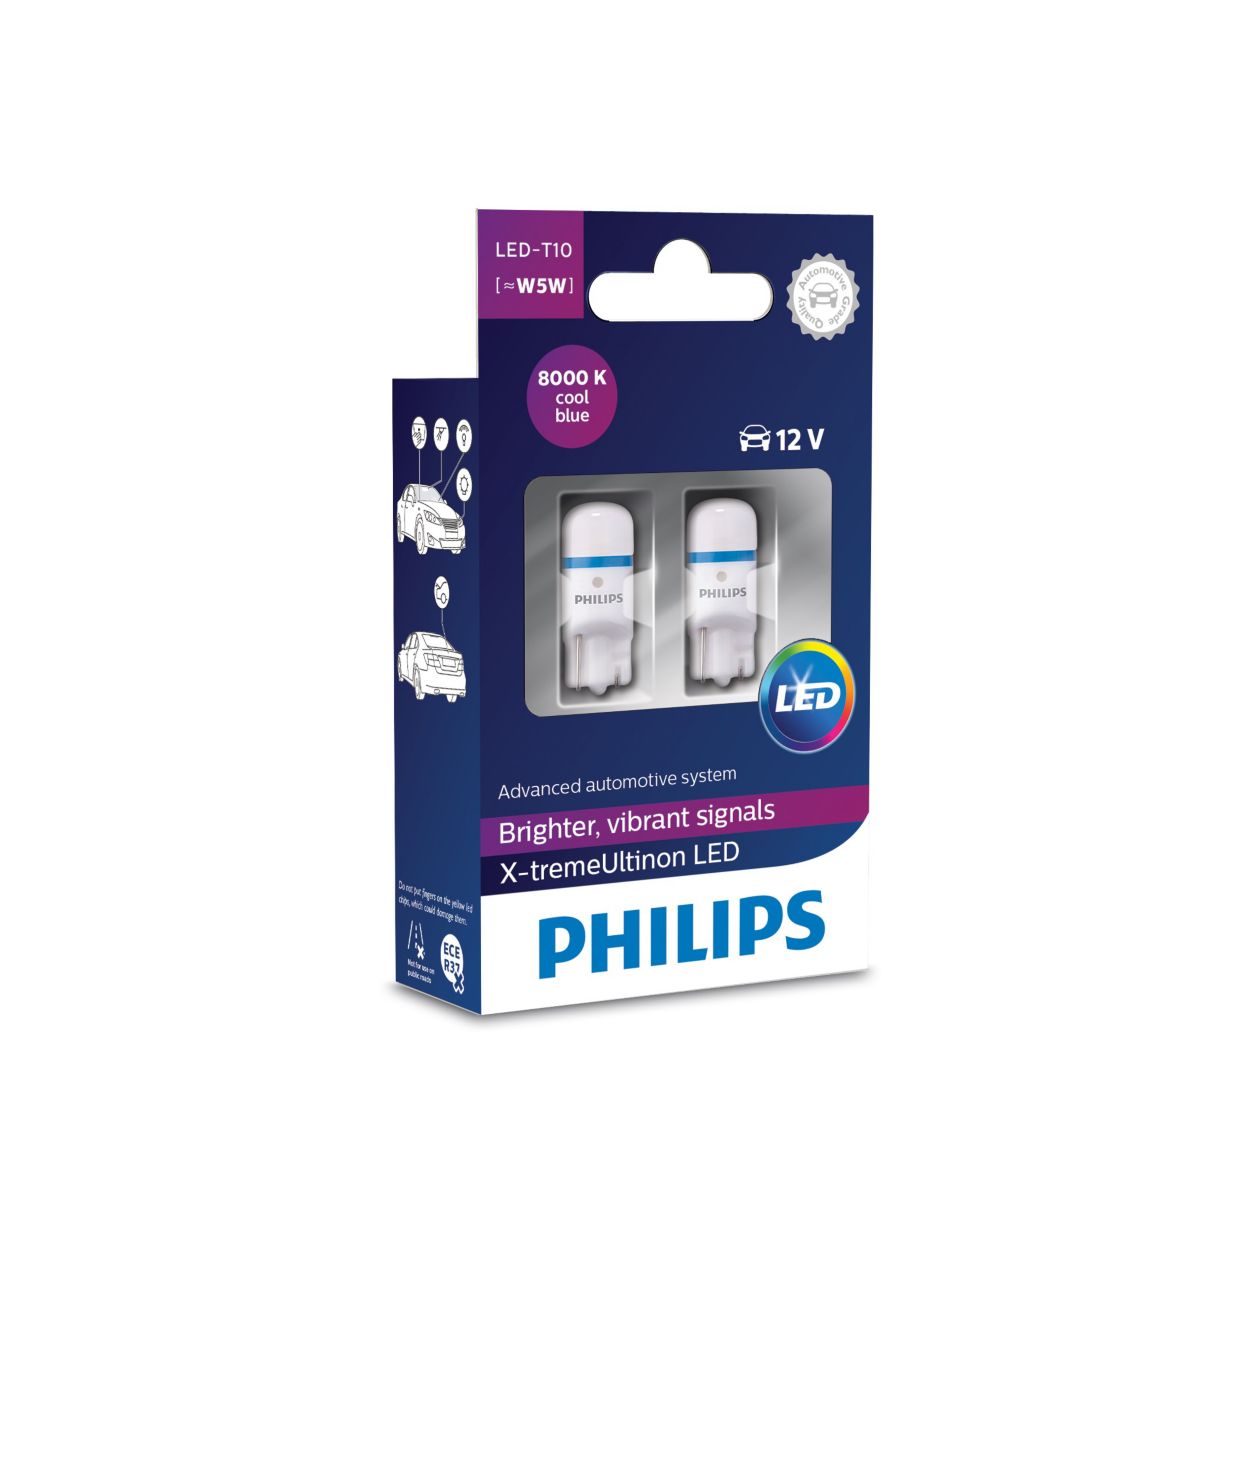 https://images.philips.com/is/image/philipsconsumer/54243d96e1a3437297b7afaa0093356f?$jpglarge$&wid=1250